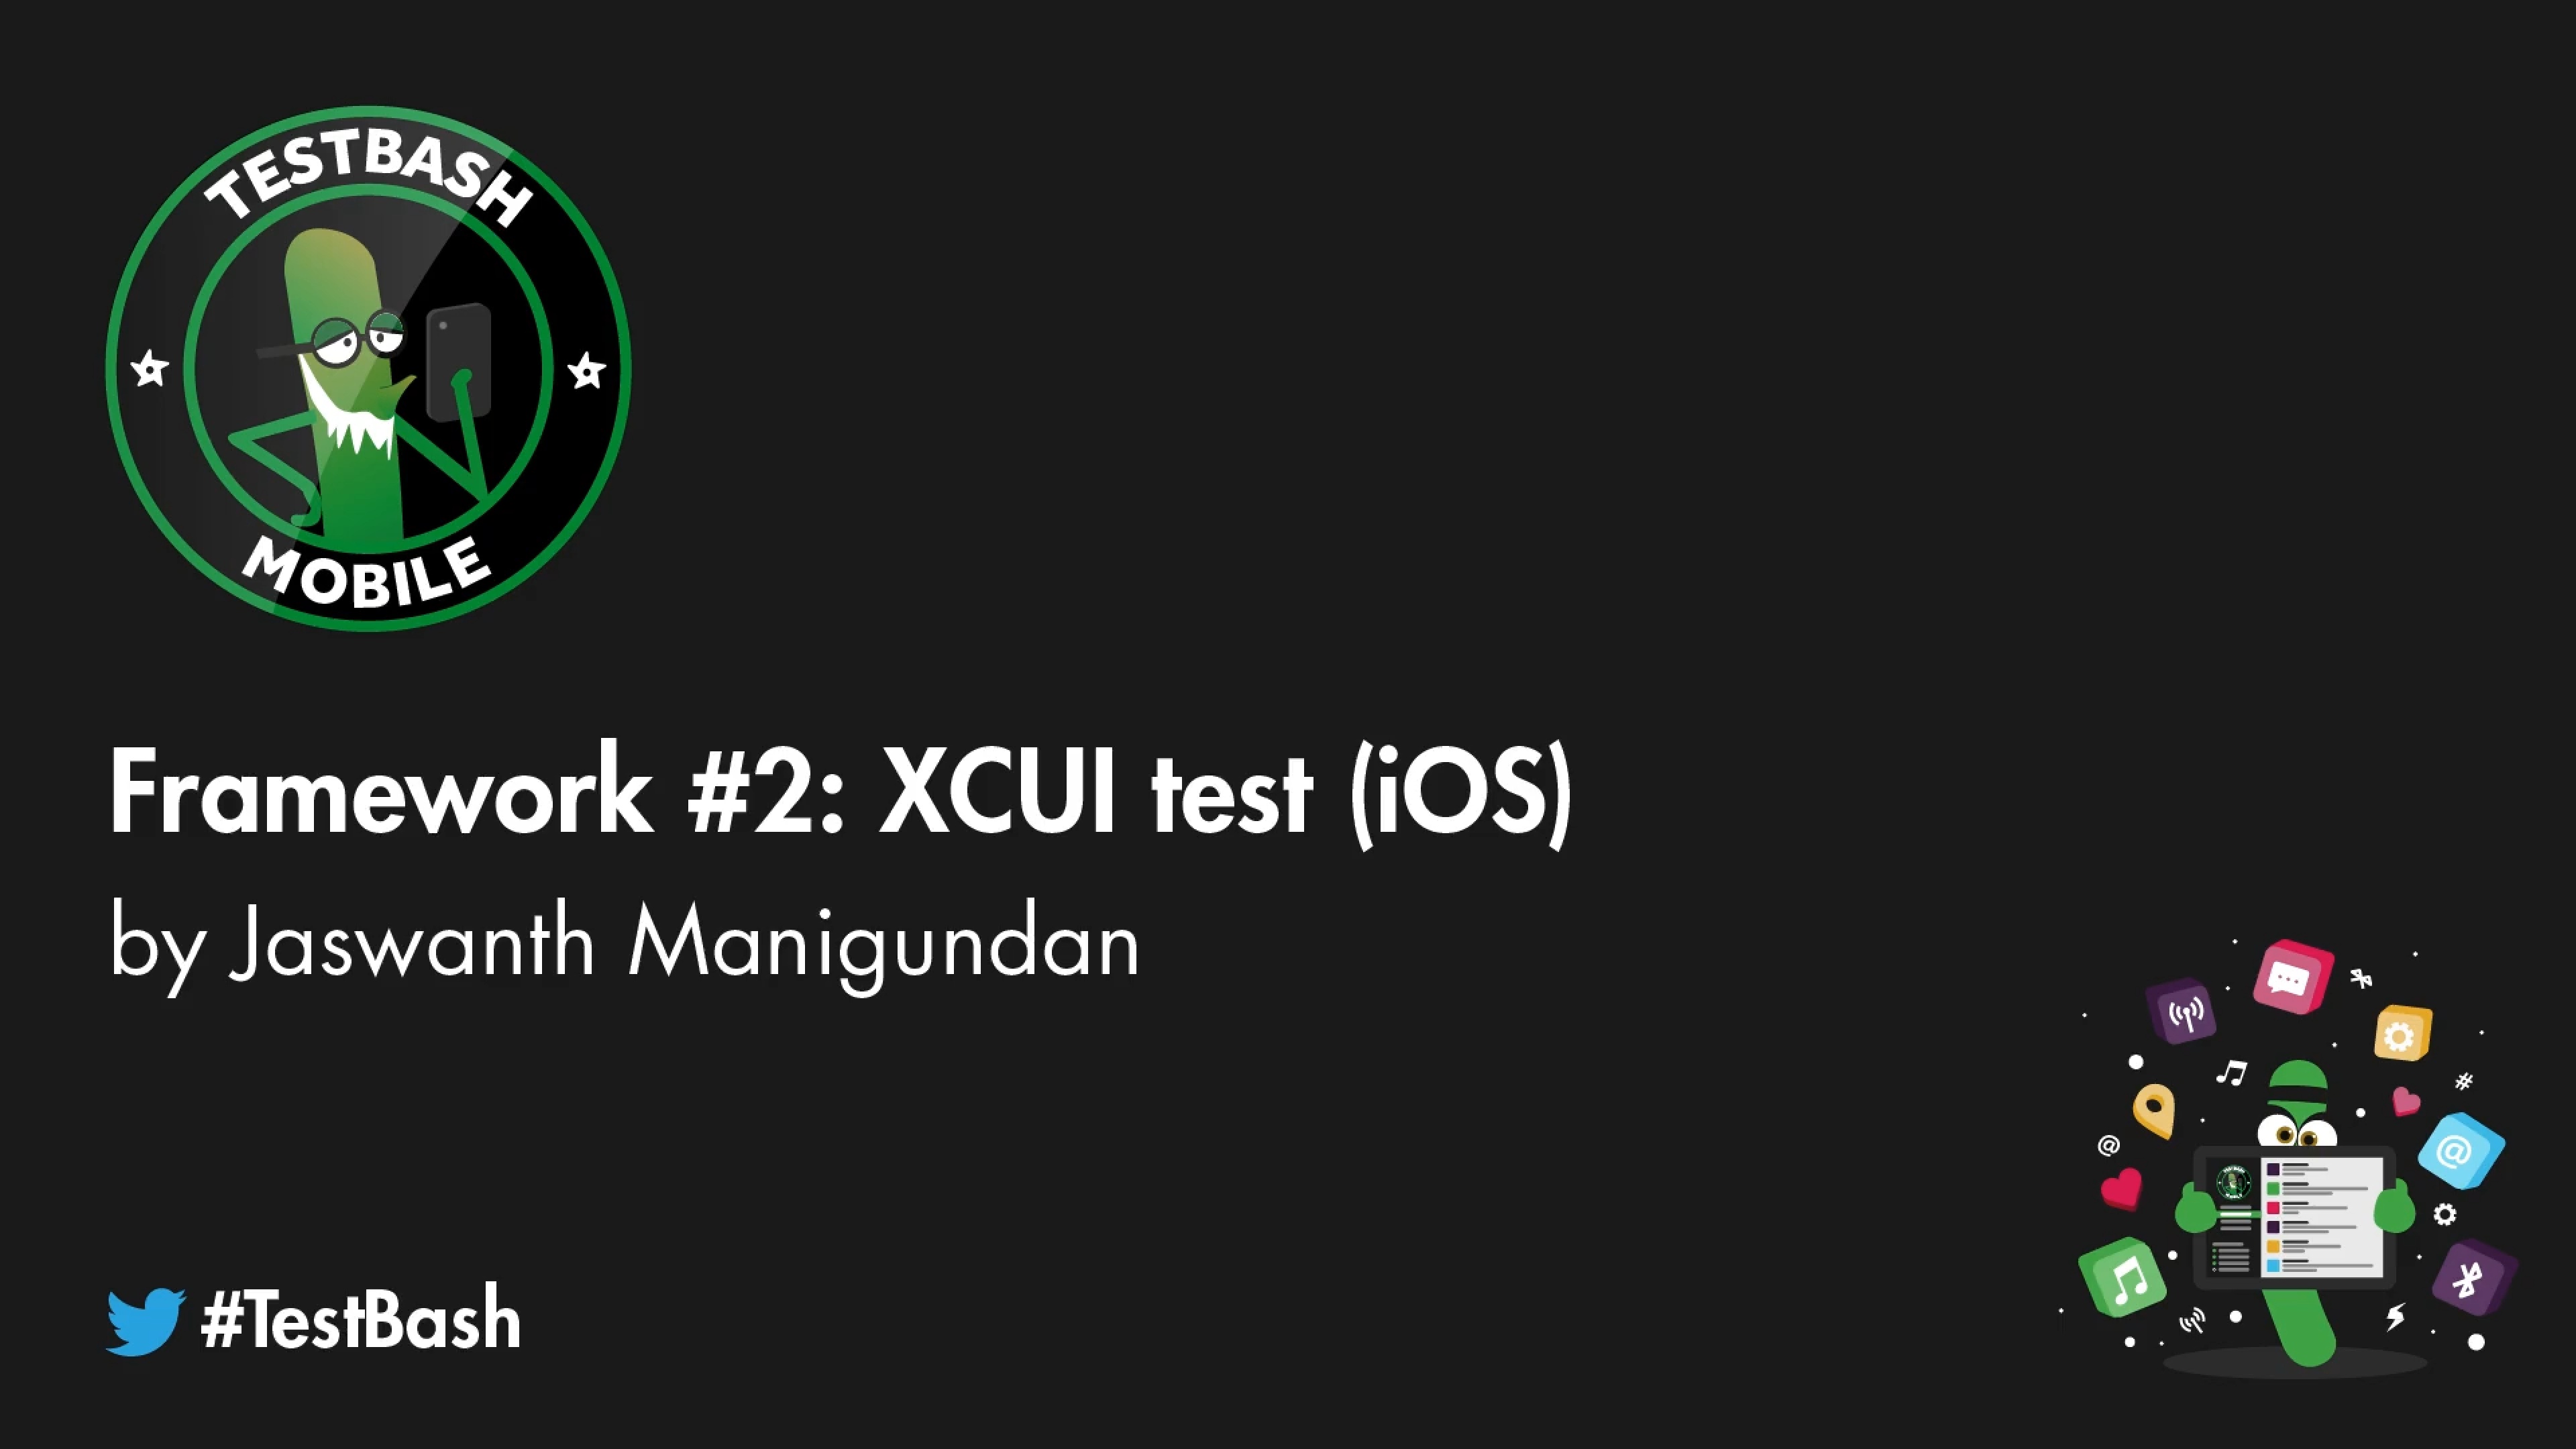 Test Automation Frameworks for Mobile: XCUI test (iOS)